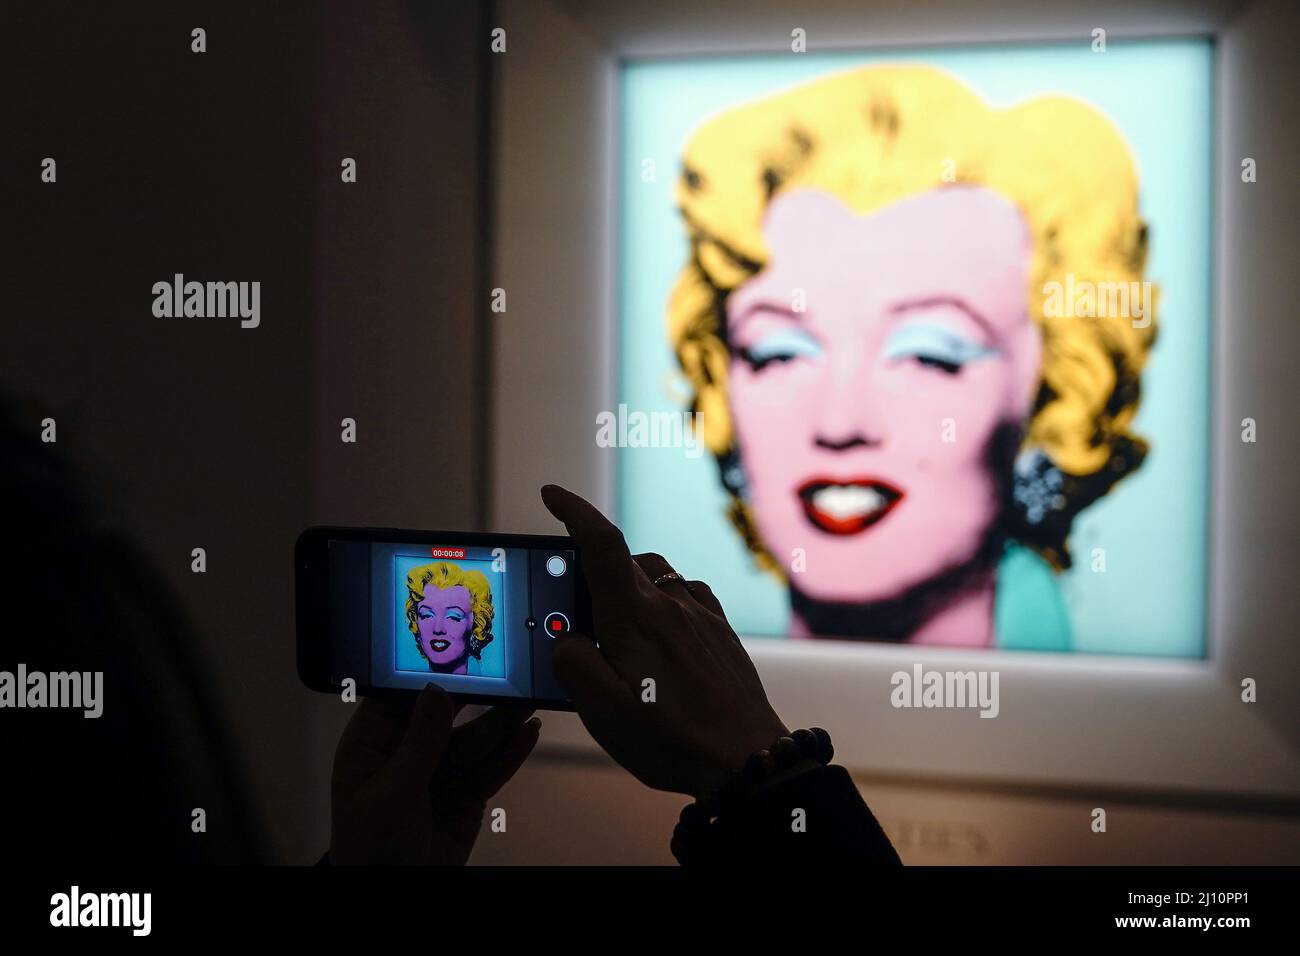 Andy Warhol's 'Shot Sage Blue Marilyn', a painting of Marilyn Monroe, is pictured on display at Christie's Auction House in advance of the piece going up for auction in the Manhattan borough of New York City, New York, U.S., March 21, 2022. REUTERS/Carlo Allegri Stock Photo